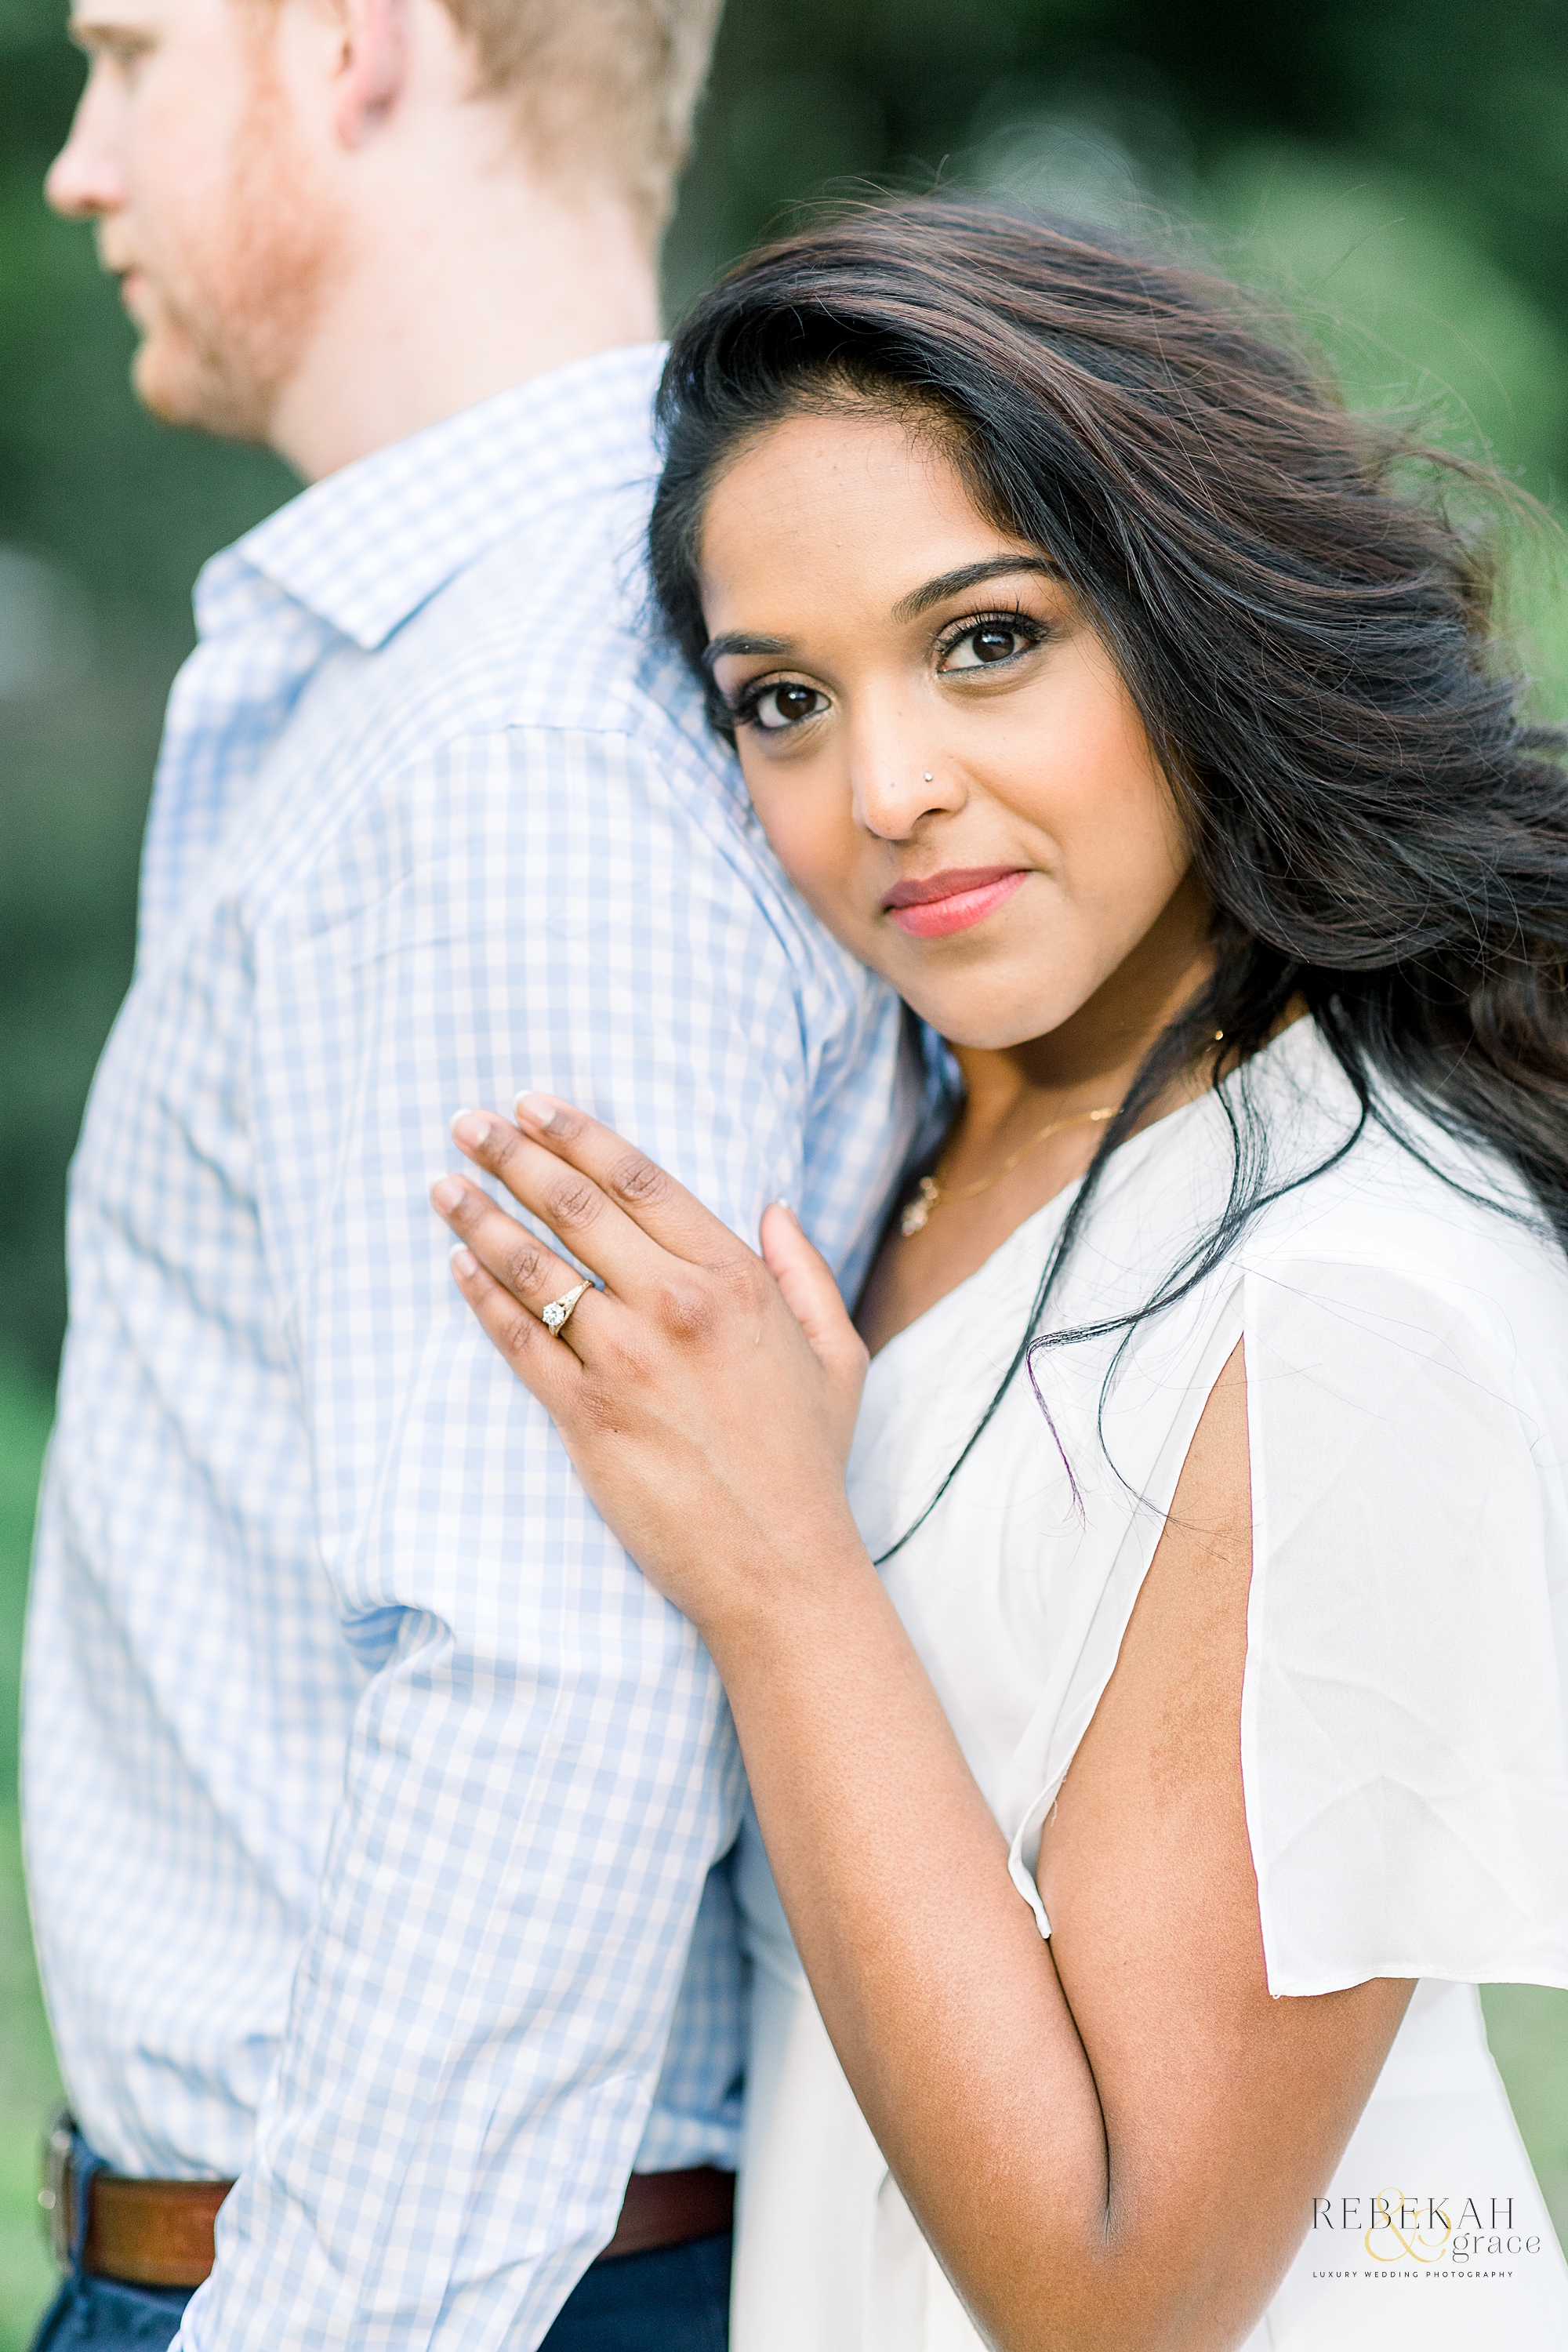 Custom gold engagement ring.  Raleigh engagement photography taken in JC Raulston Arboretum and Downtown Raleigh North Carolina by Rebekah & Grace Photography. 